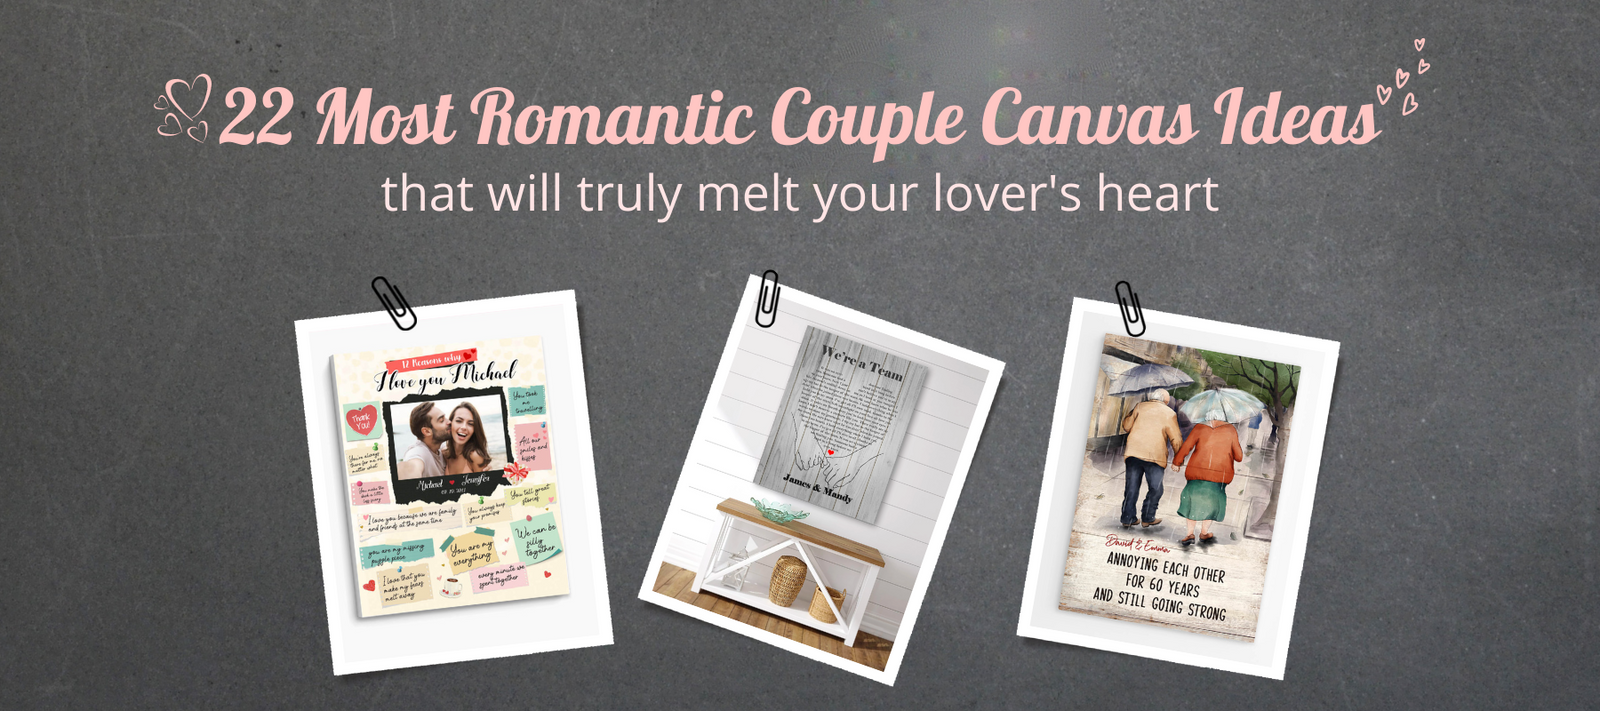 44 Couples crafts ideas  crafts, couple crafts, diy gifts